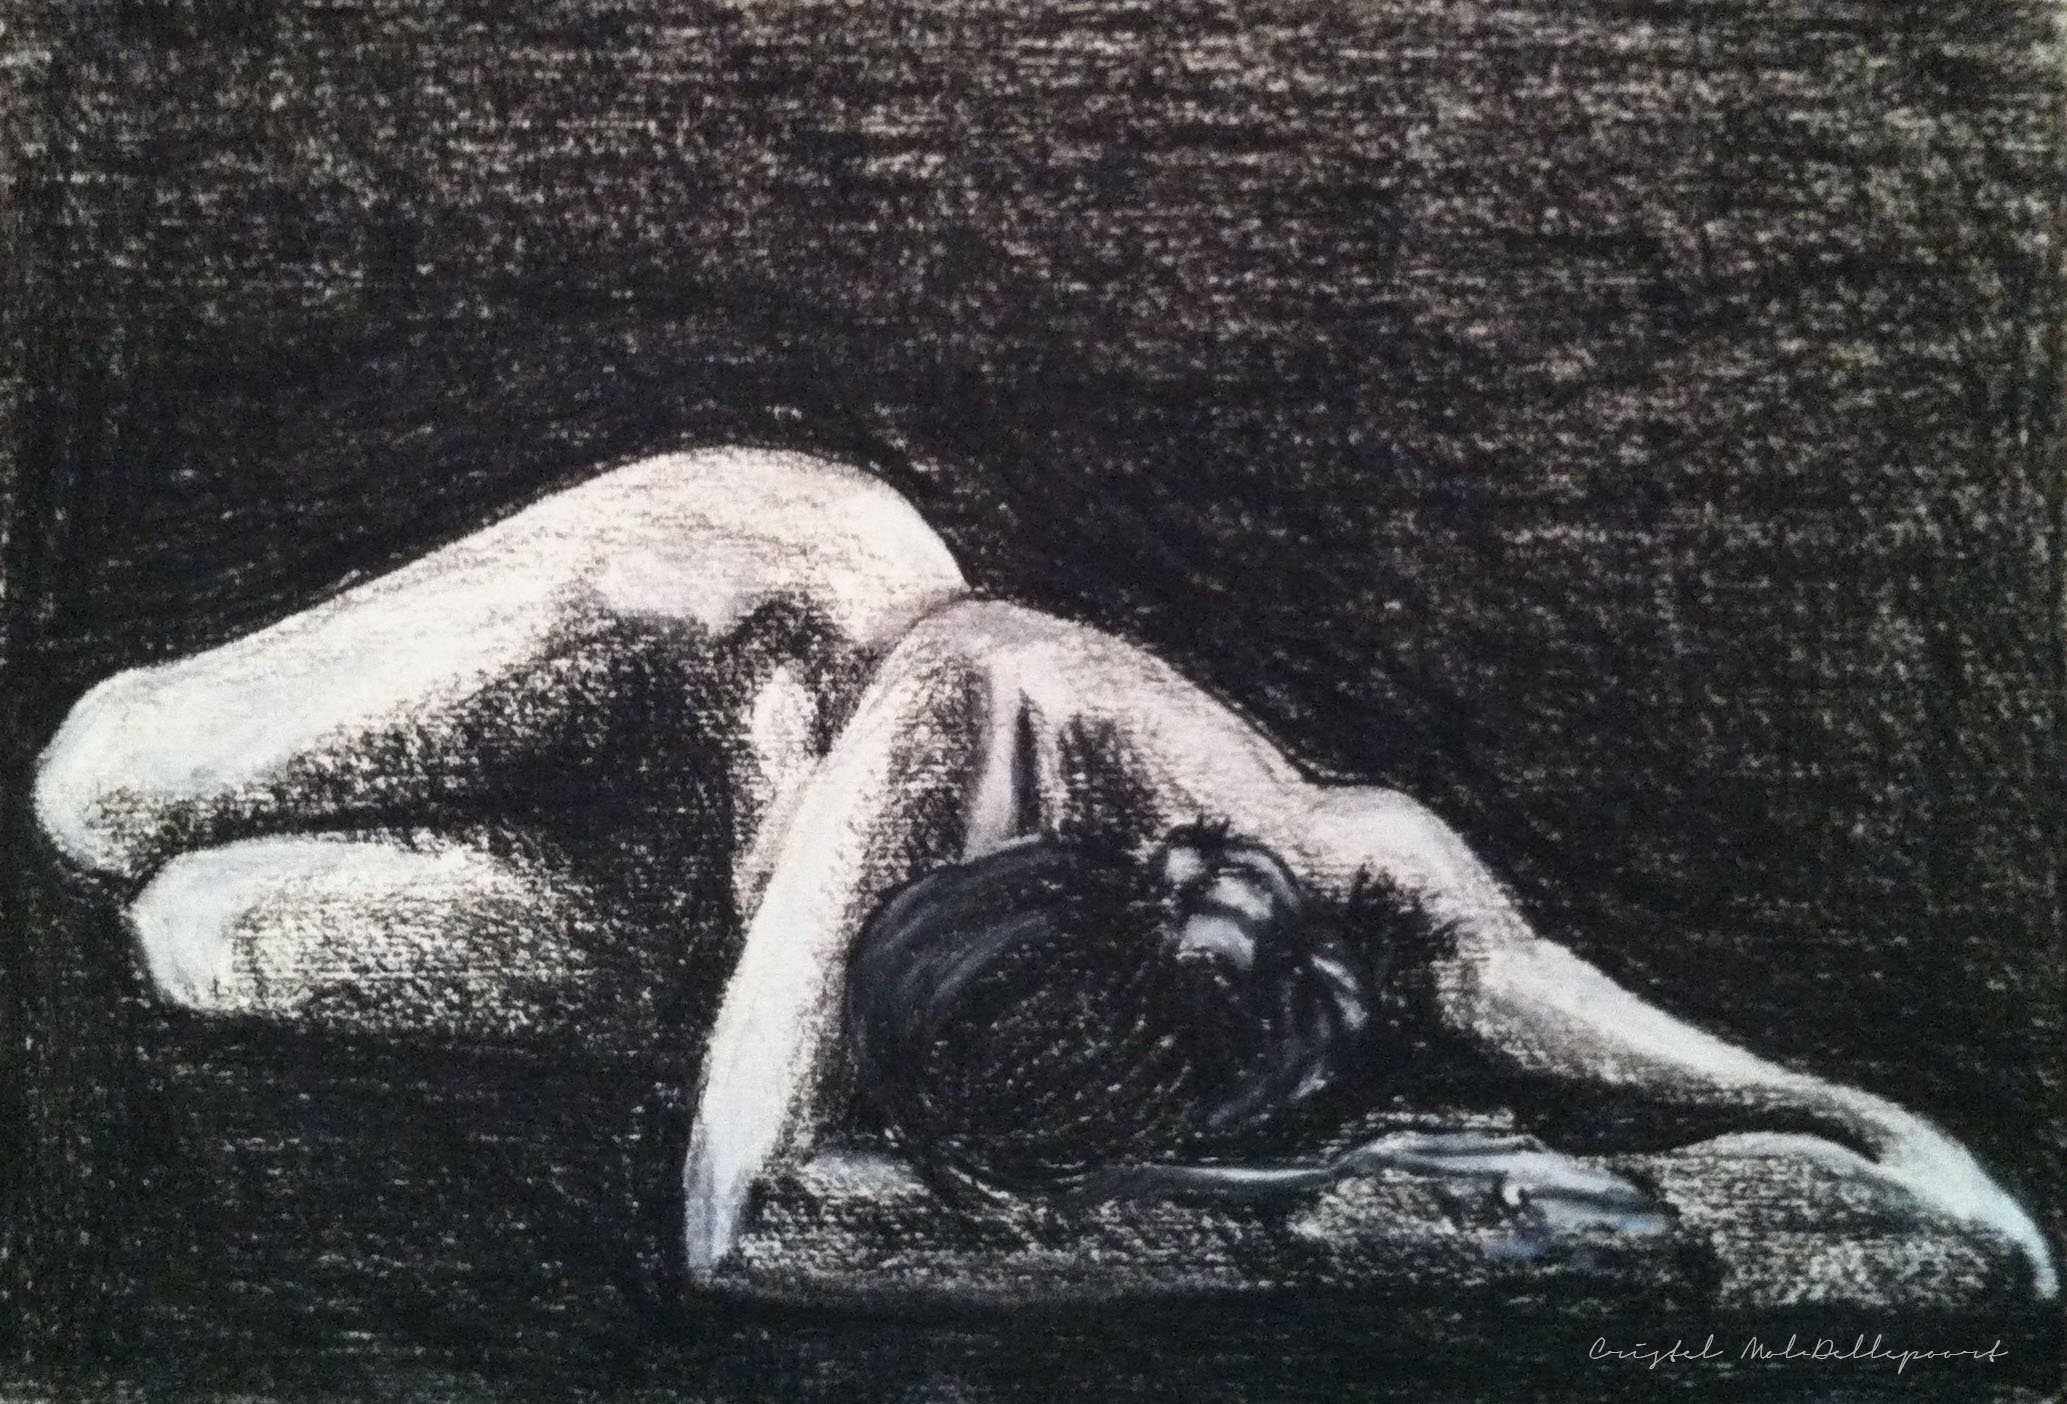 Pastel inspired by Ruth Bernhard's Perspective (1967)